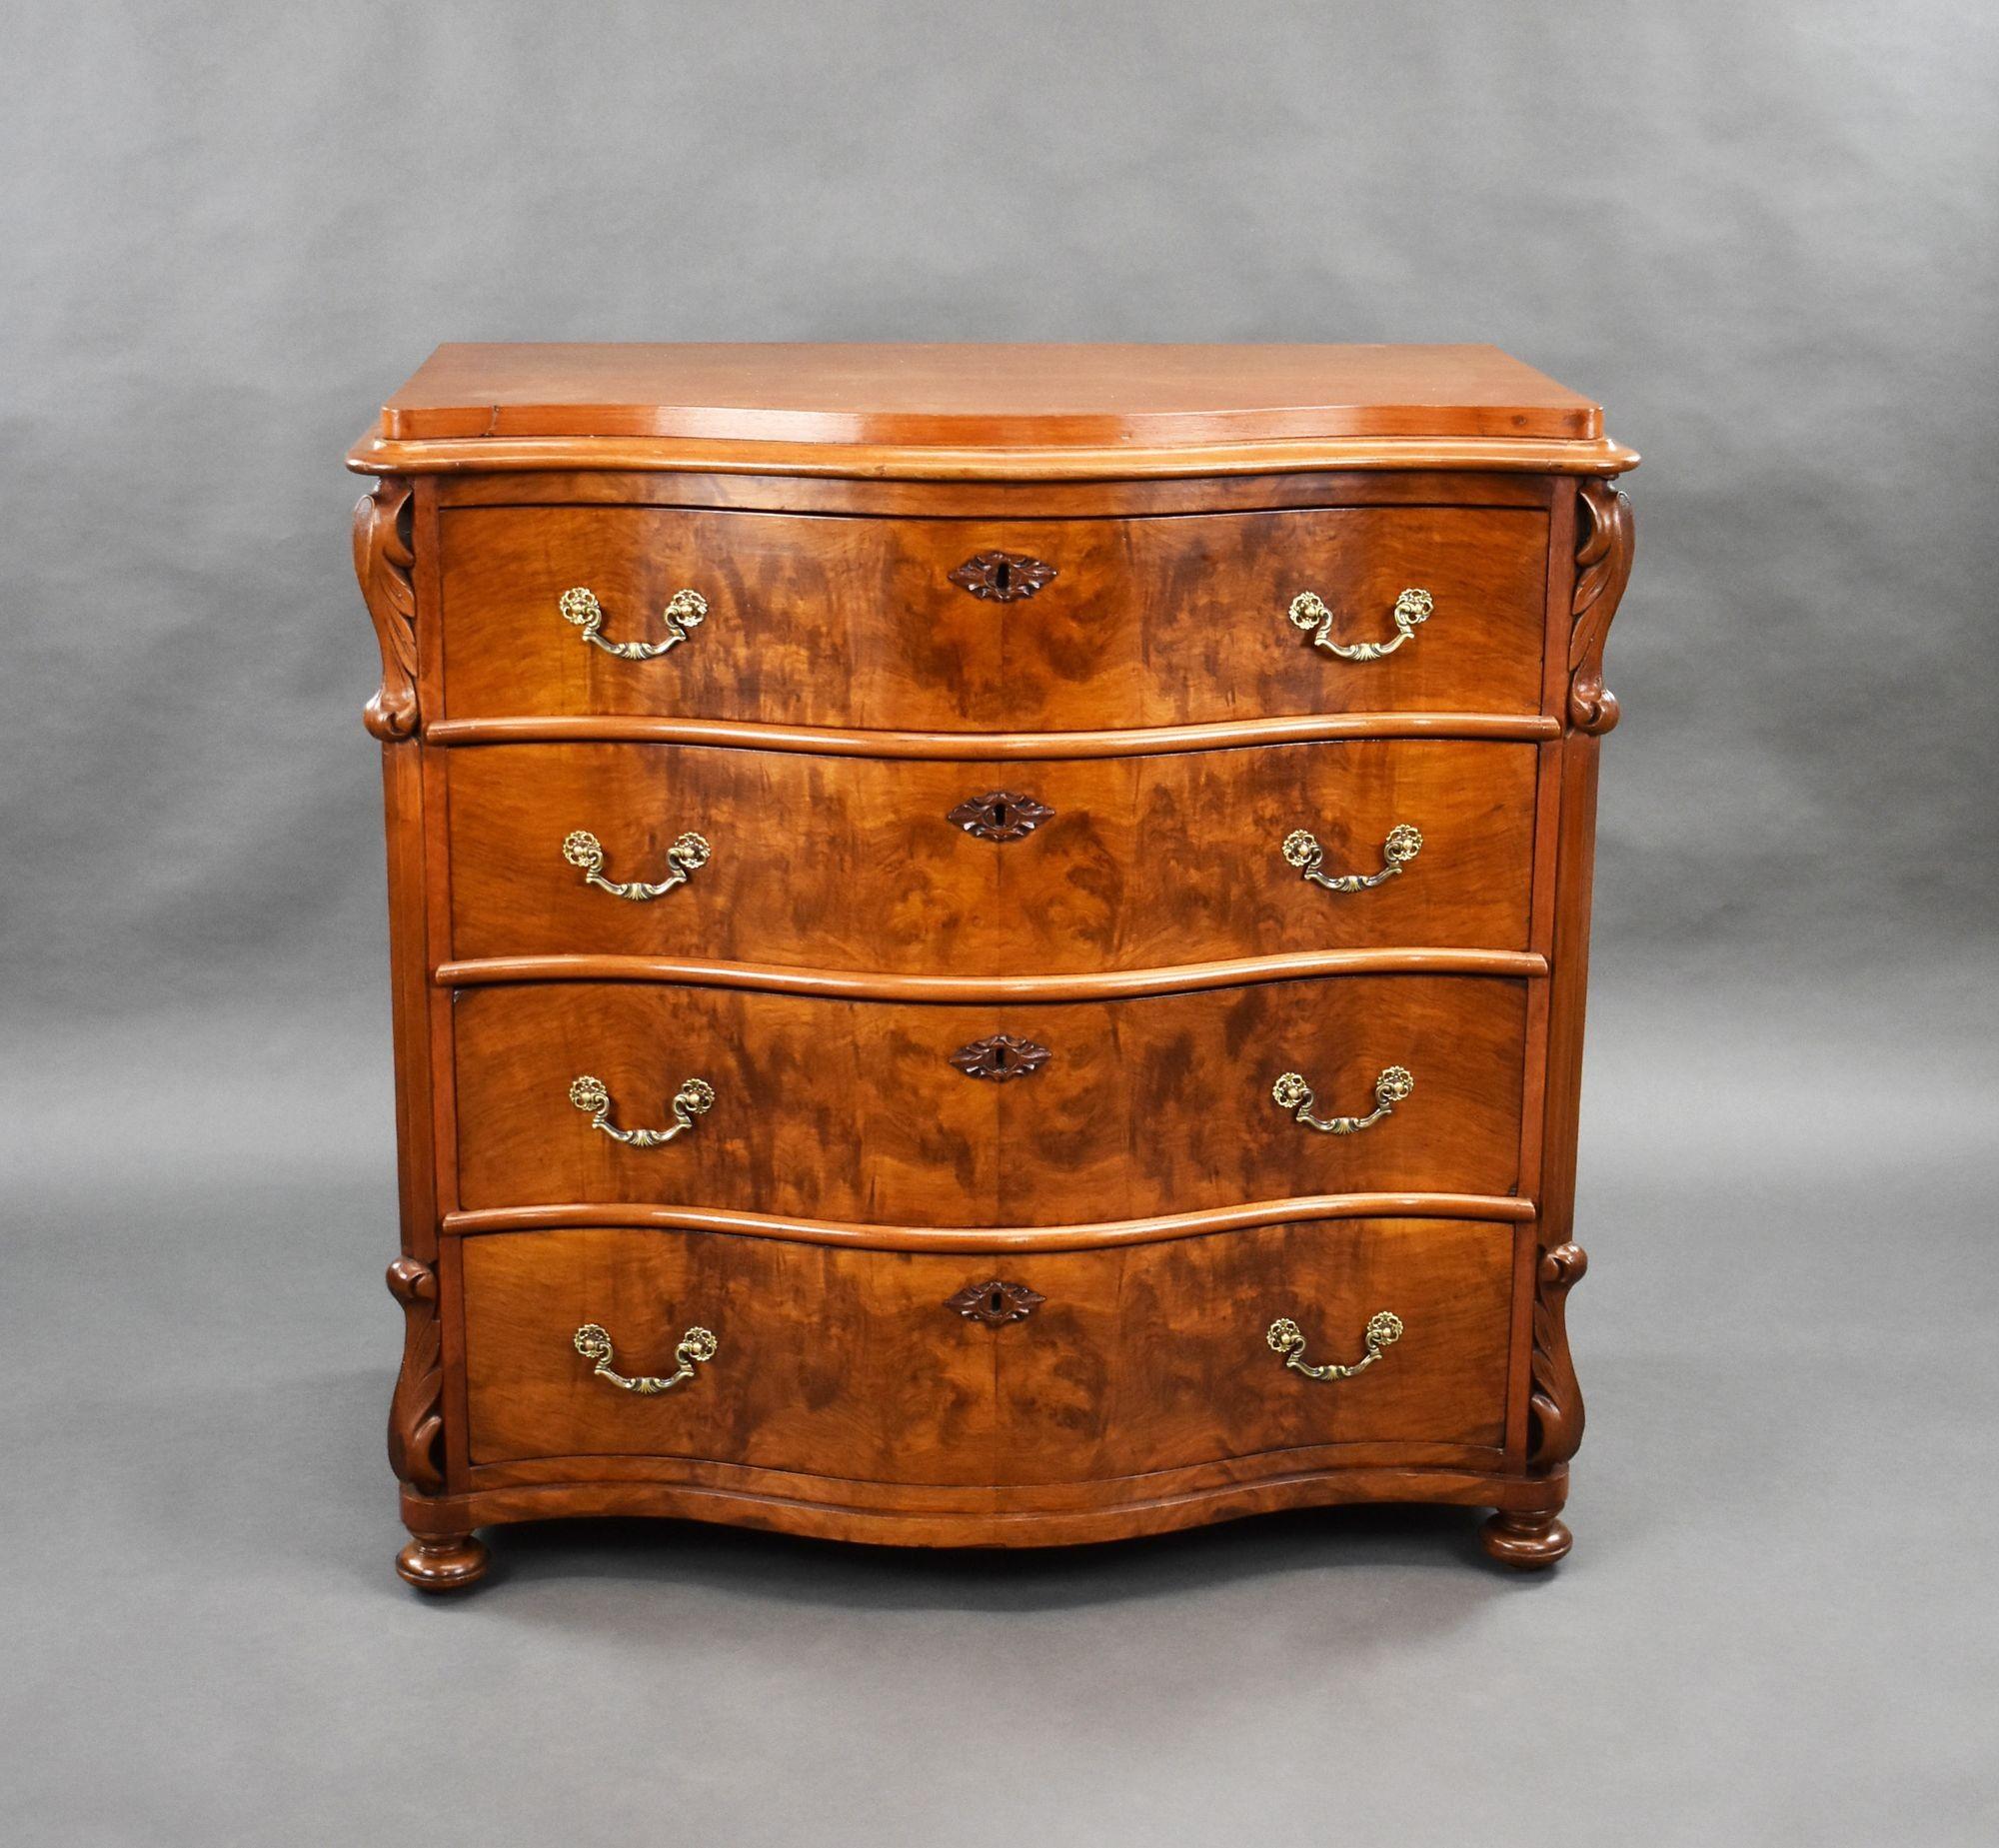 For sale is a good quality 19th century walnut biedermeier serpentine chest of drawers. Having an arrangement of four drawers, each with brass handles, flanked by floral brackets to the top and the base, the chest stands on bun feet and is in very